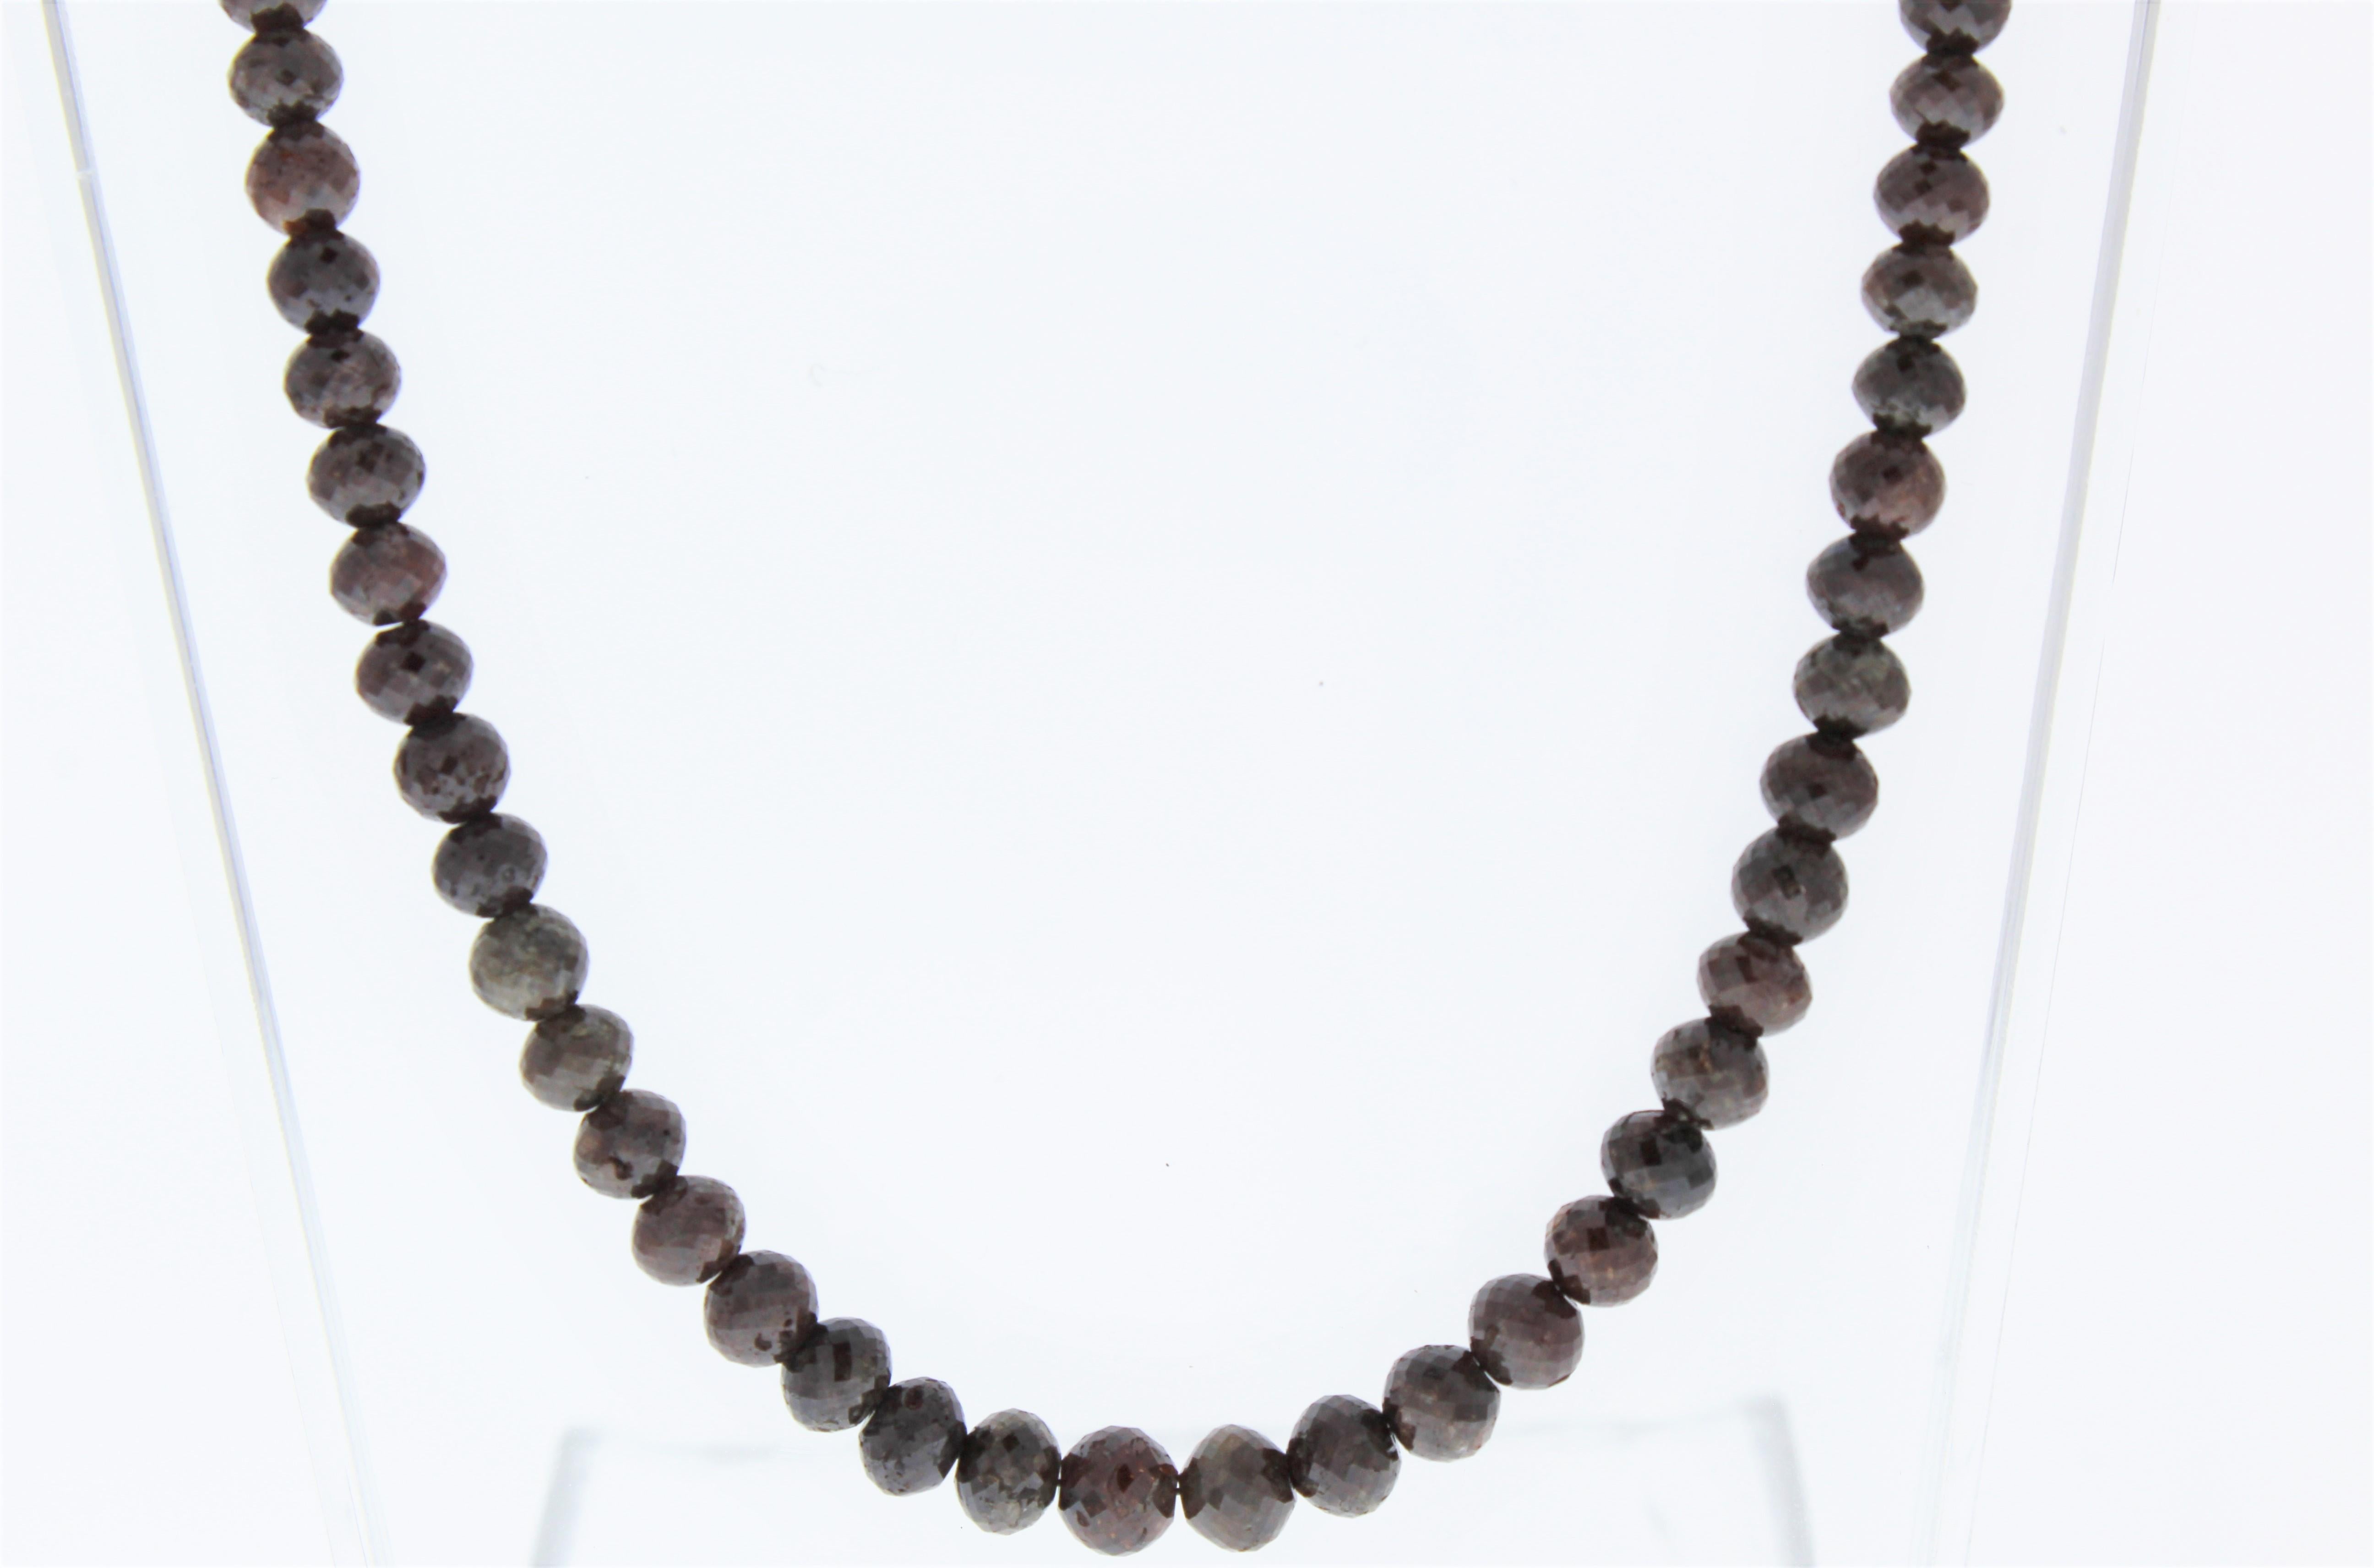 This necklace is a dramatic strand of 104 natural brown round diamonds totaling 102.28 carats. Slim in design and perfect for layering alongside other necklaces and chains, this brown diamond necklace is sure to get noticed.